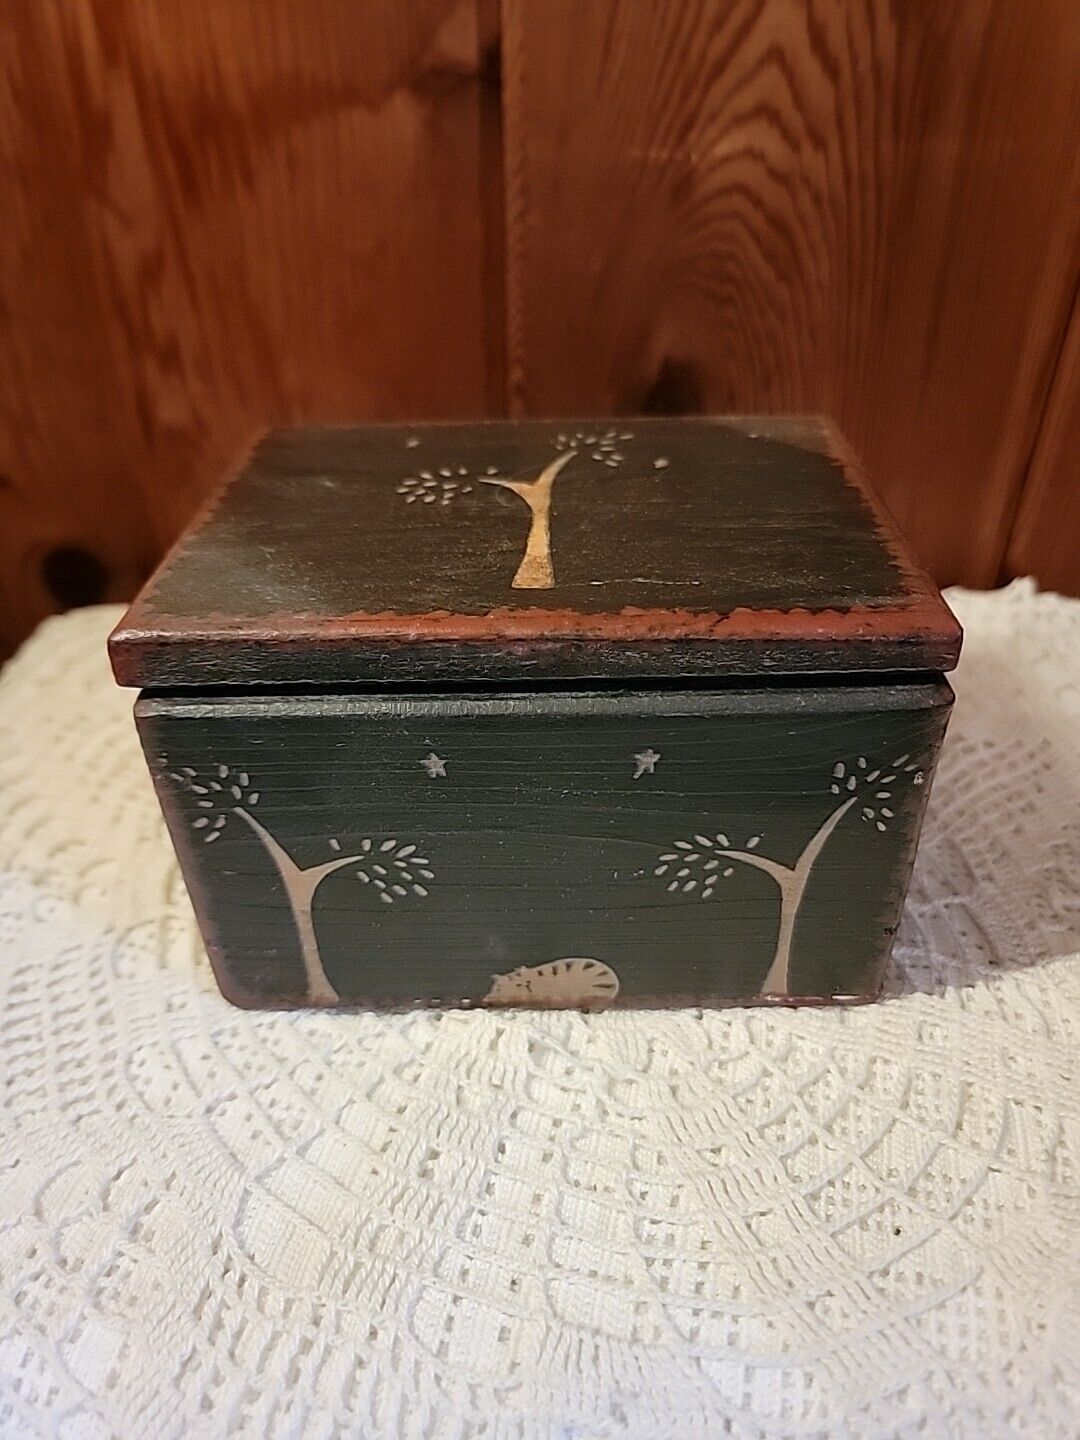 Vintage Hand-Painted Wood Box Leather Hinges B Altmans & Co NY with gift box